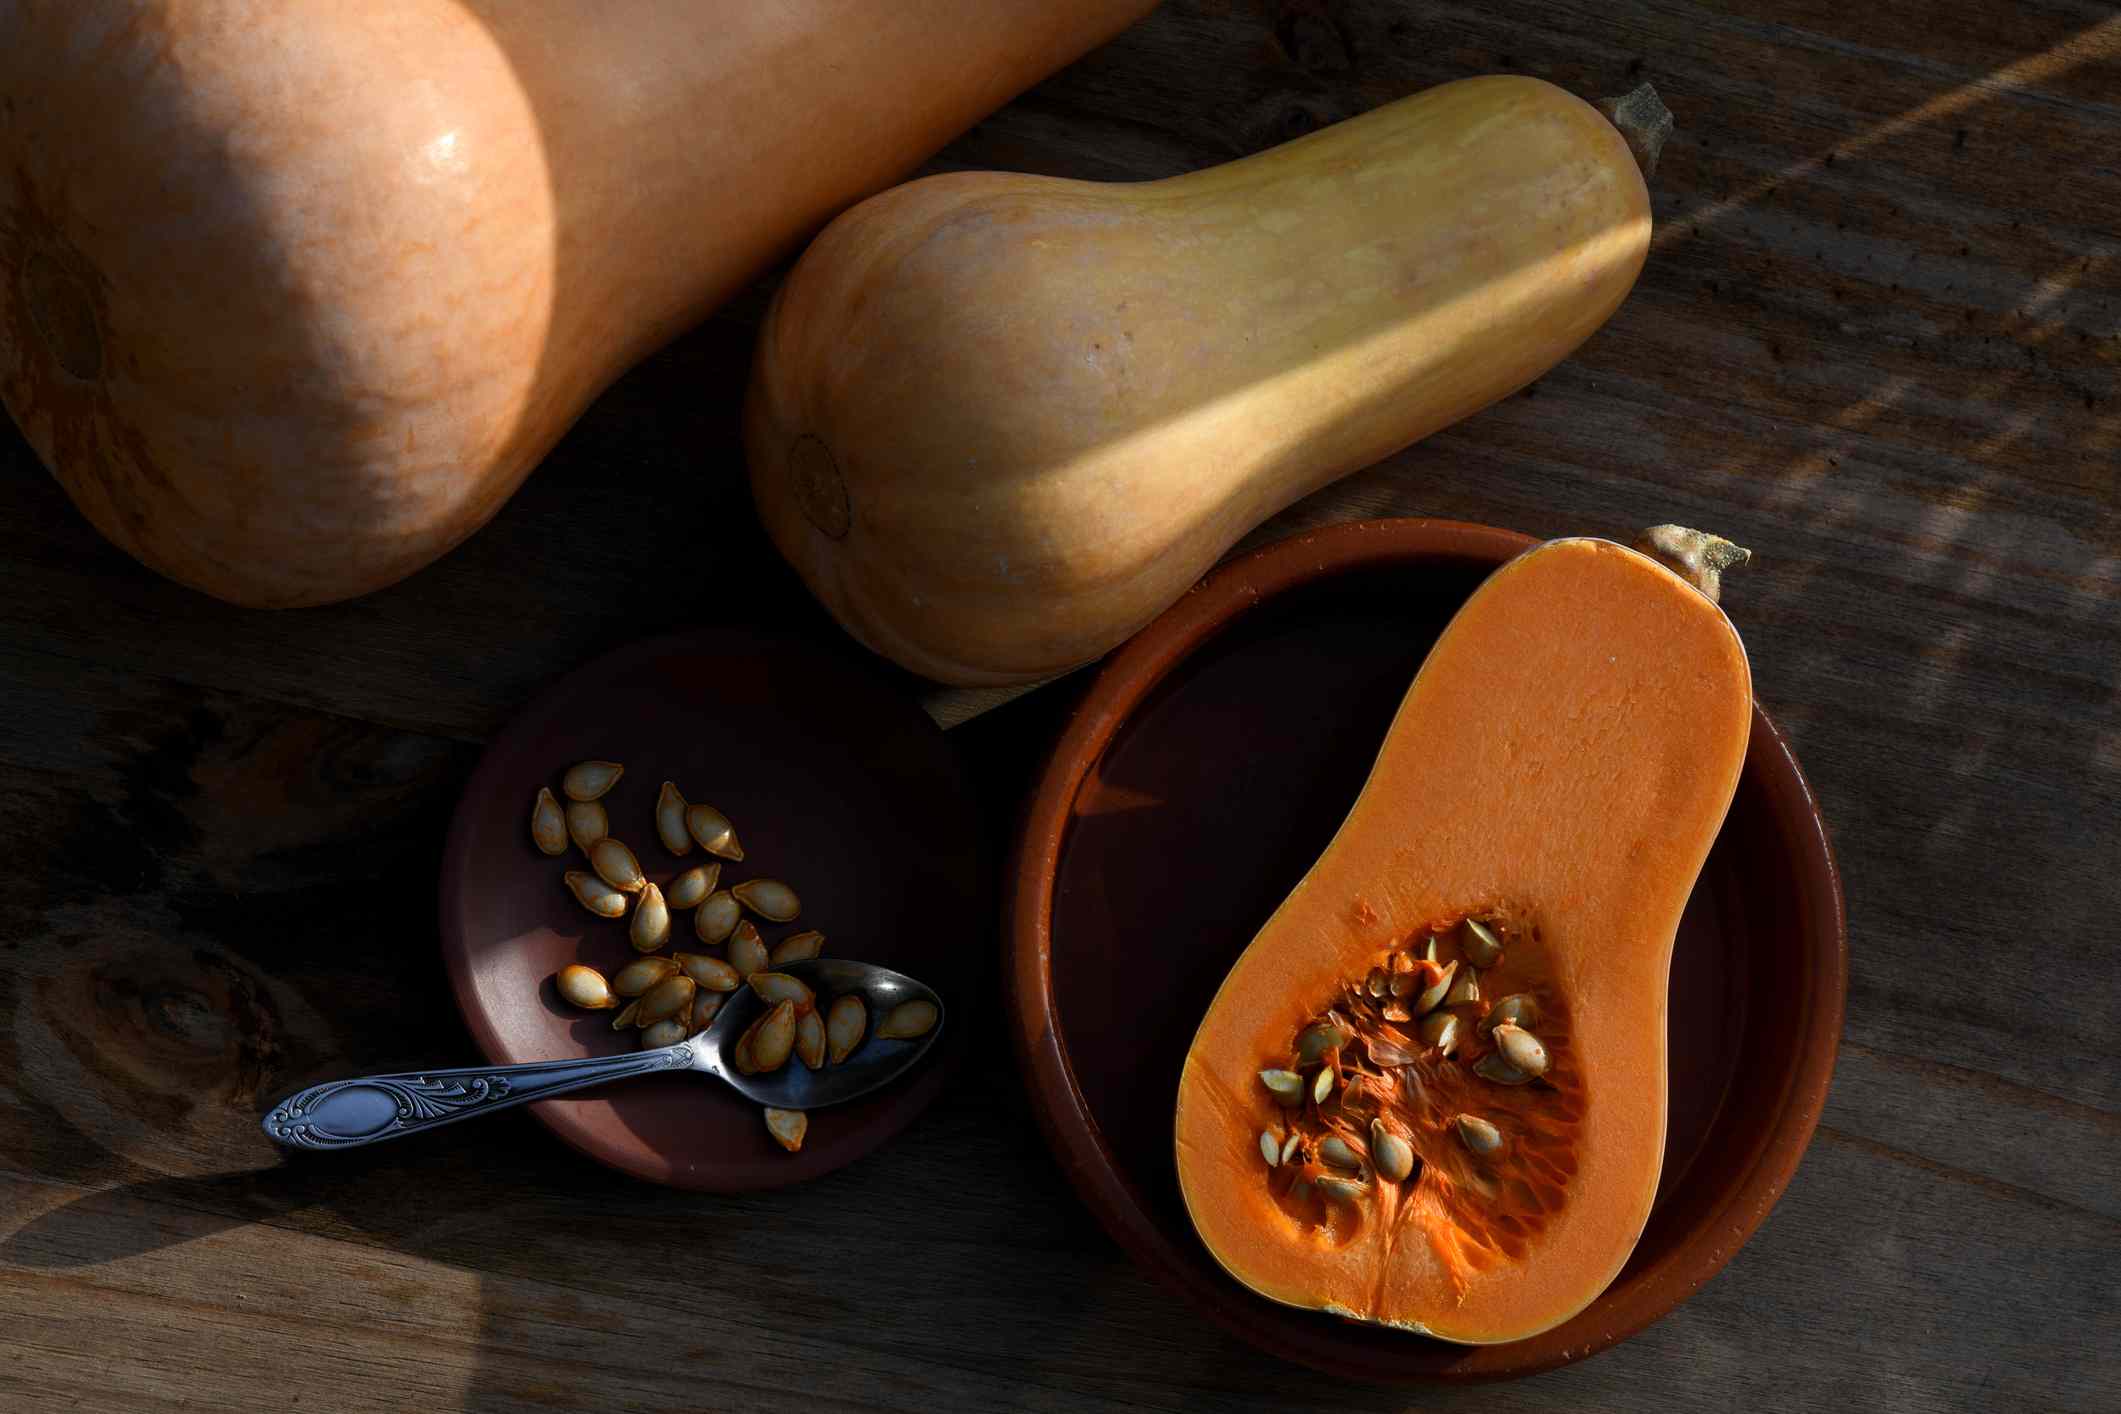 Butternut misses out on the health benefits of this fall vegetable